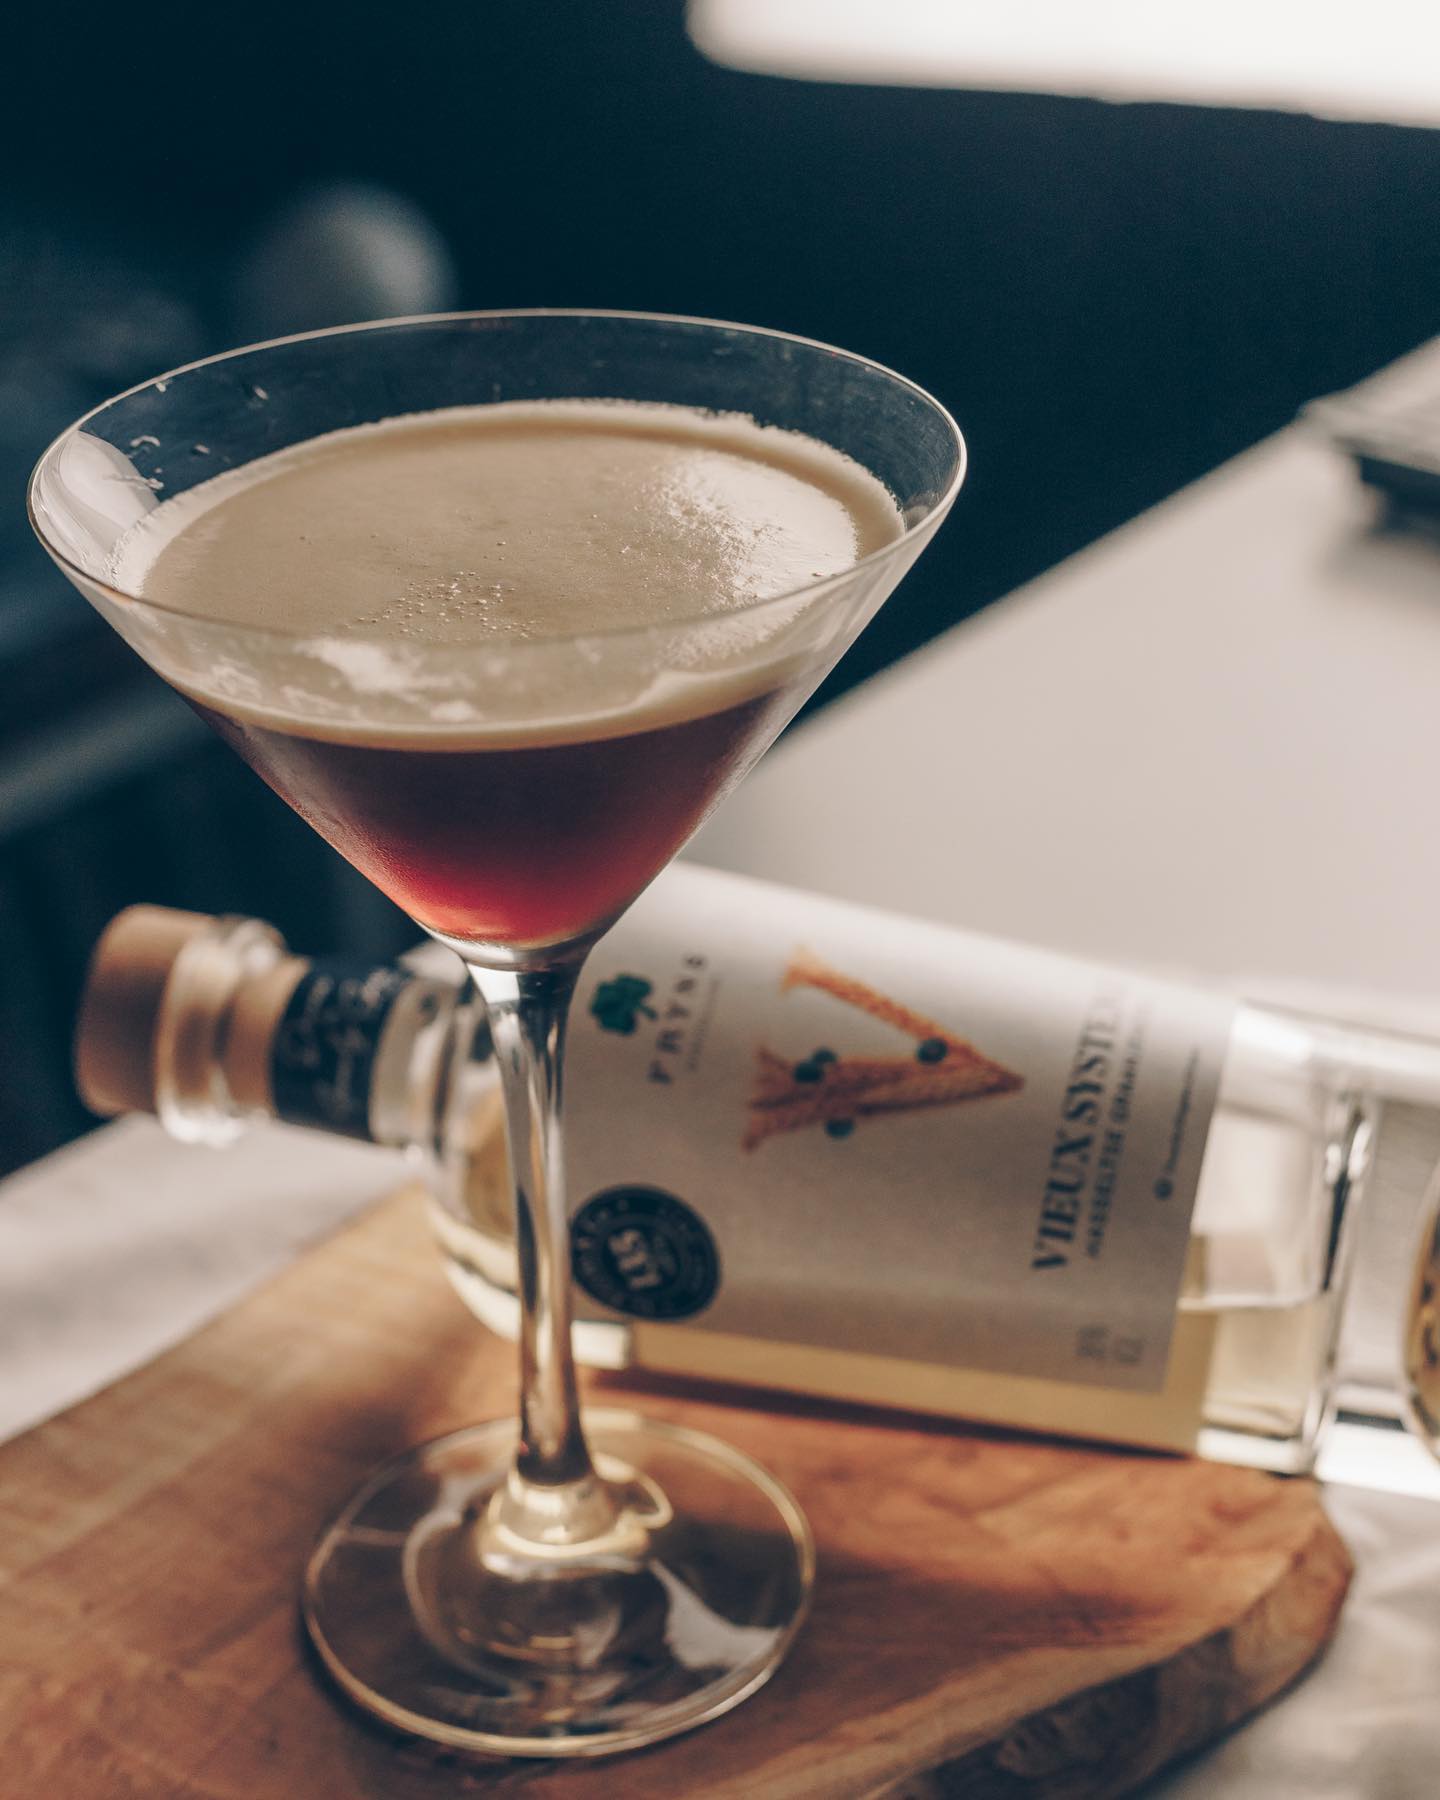 Hope you all had a great time celebrating with your friends and family.

Need a bit of caffeine to boost you in the new year? Keep an eye out on my account I’ll post the recipe on this riff of the espresso martini soon. (It’s made with @fryns_distillery jenever)

#mindfulmixologist #cocktailarts #cocktailblog #craftmixology #mixologycocktail #imbibemagazine #favouritecocktail #Cocktailblogger #cocktailsforyou #cocktailacademy #craftedmixology #perfectserve #nextlevelbartending  #mixologist #craftcocktails #cocktails #cocktailporn #imbibe #gintime #bartender  #bartenders #mixology #drinkpic #drinksofinstagram #drinkers  #cocktailsforyou #cocktailsanddreams #cocktaillovers #cocktailculture #mixologyart